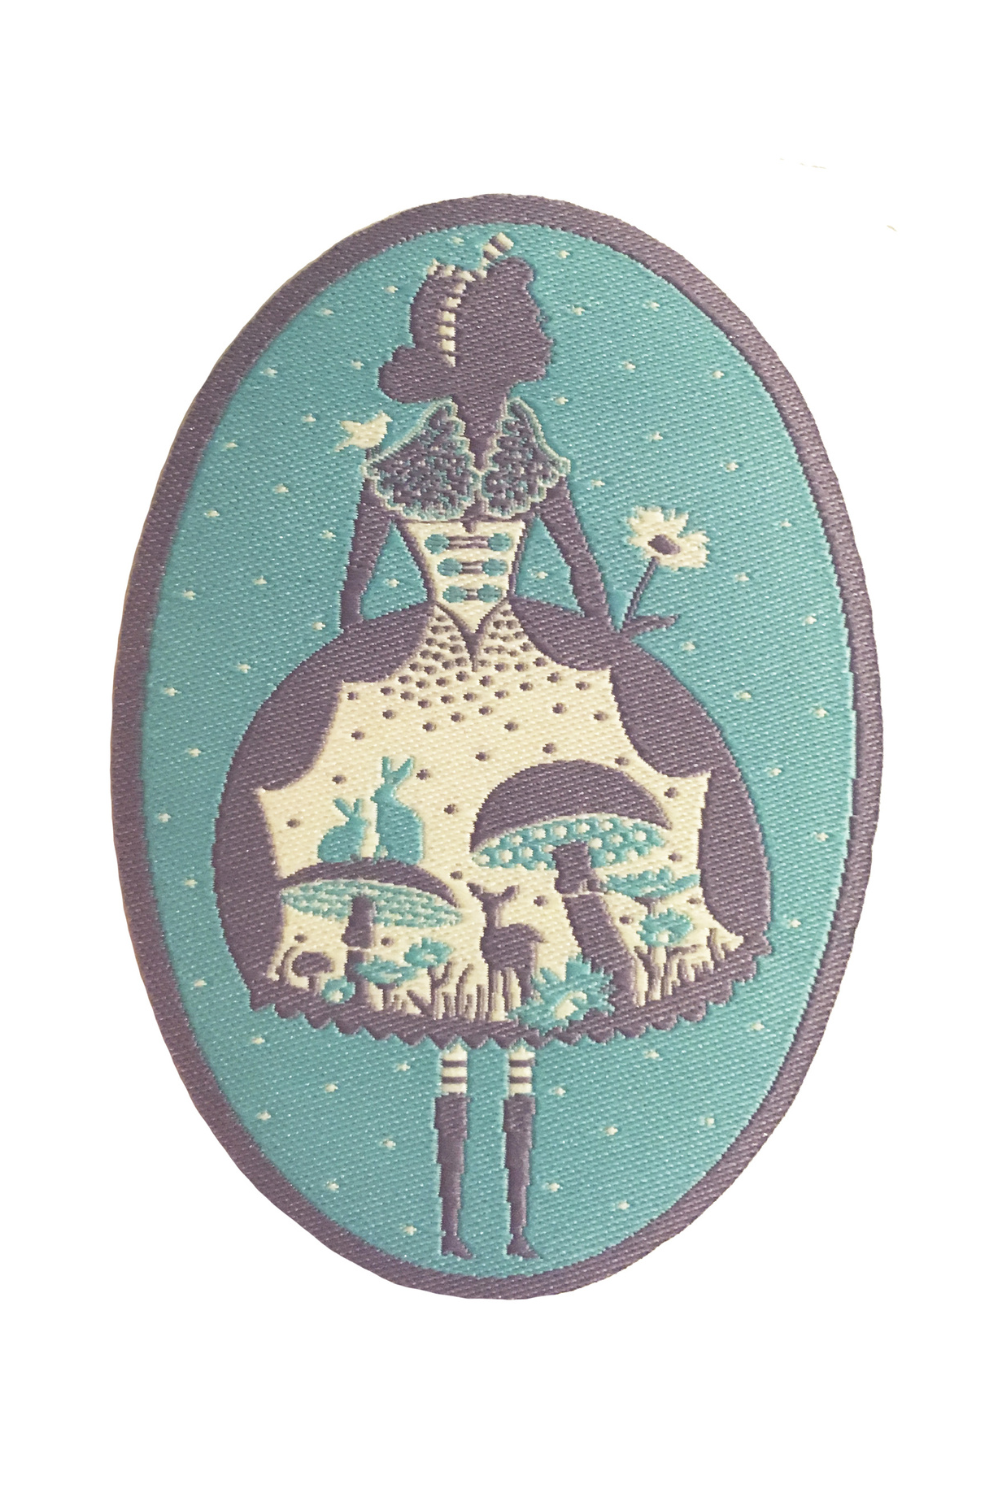 Light blue, grey and white oval patch with Alice in Wonderland design